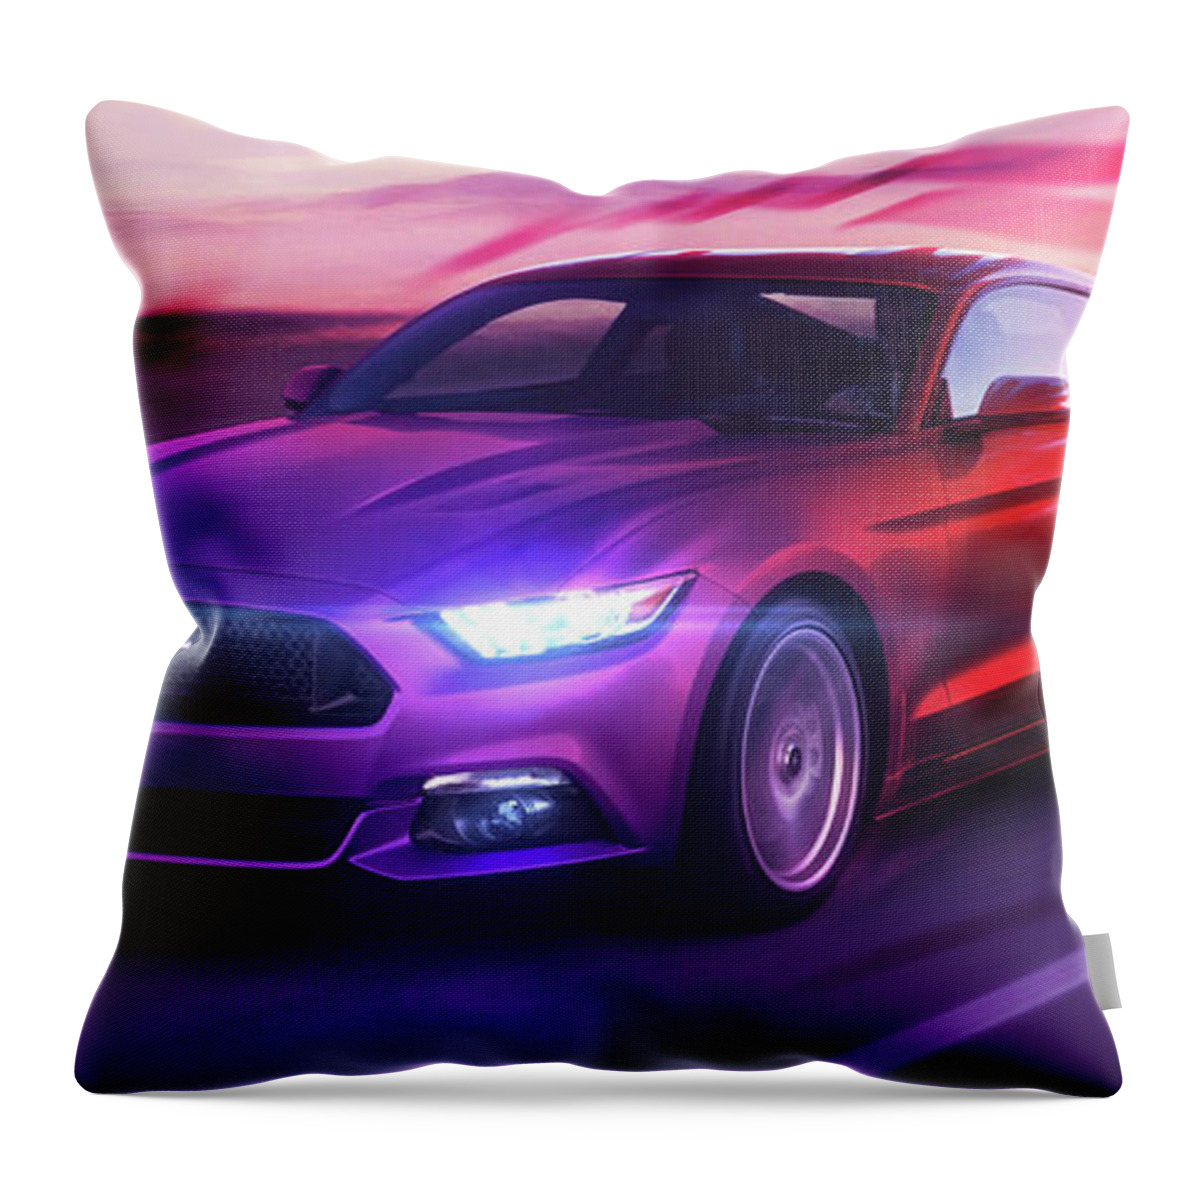 Cars Throw Pillow featuring the digital art Art - The Great Ford Mustang by Matthias Zegveld